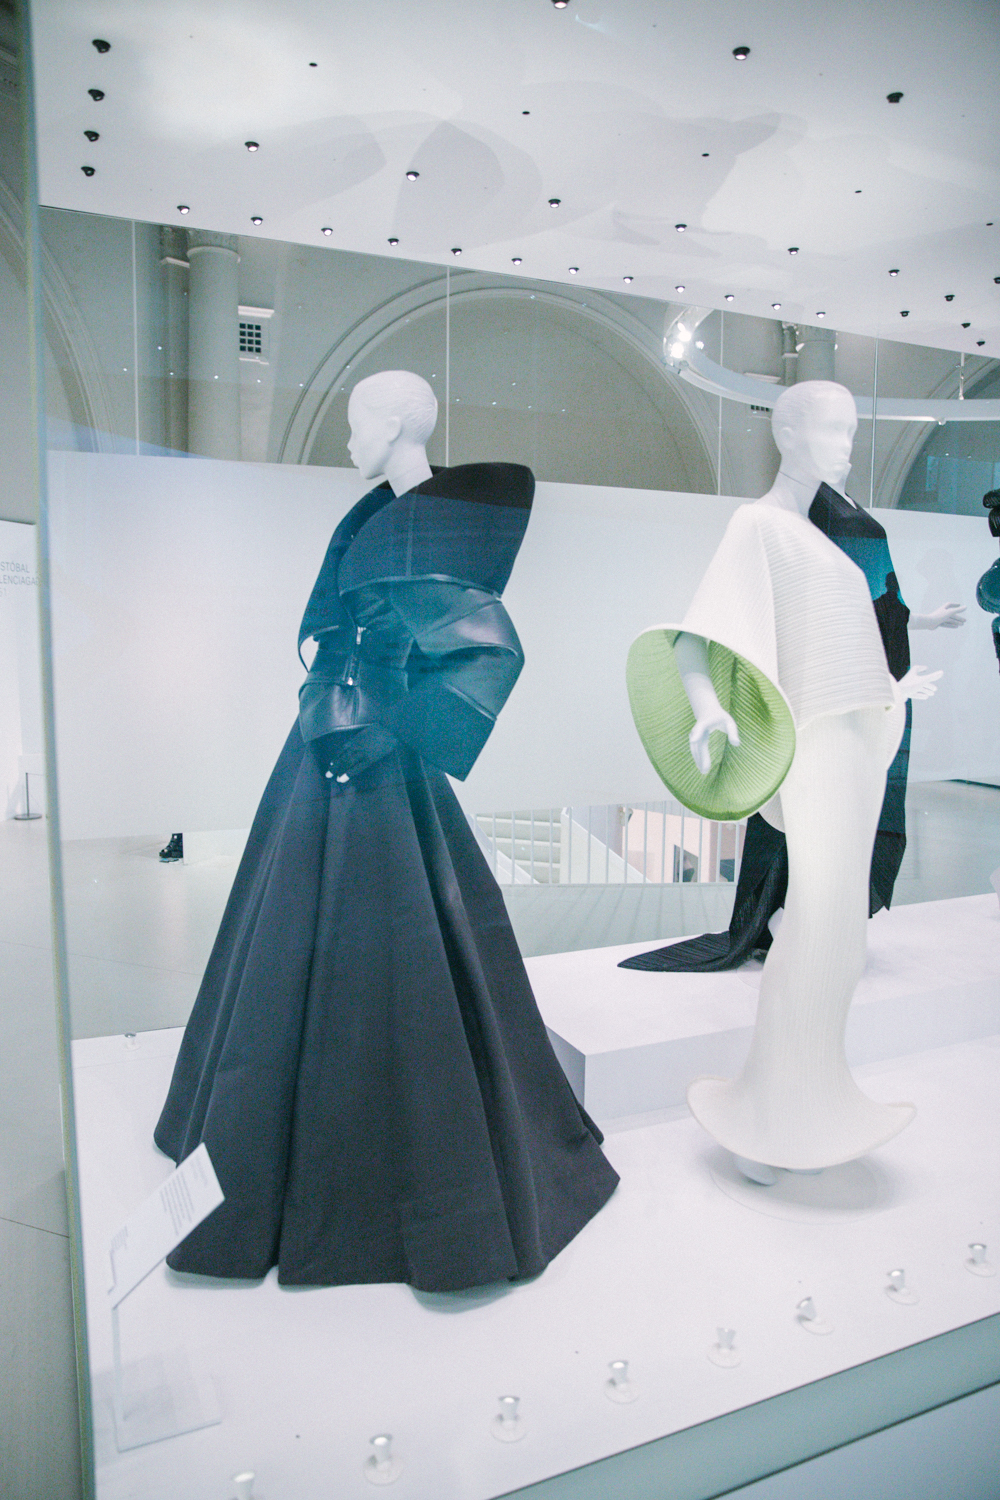 Visit the Cristóbal Balenciaga Museum, homage to a master of couture.